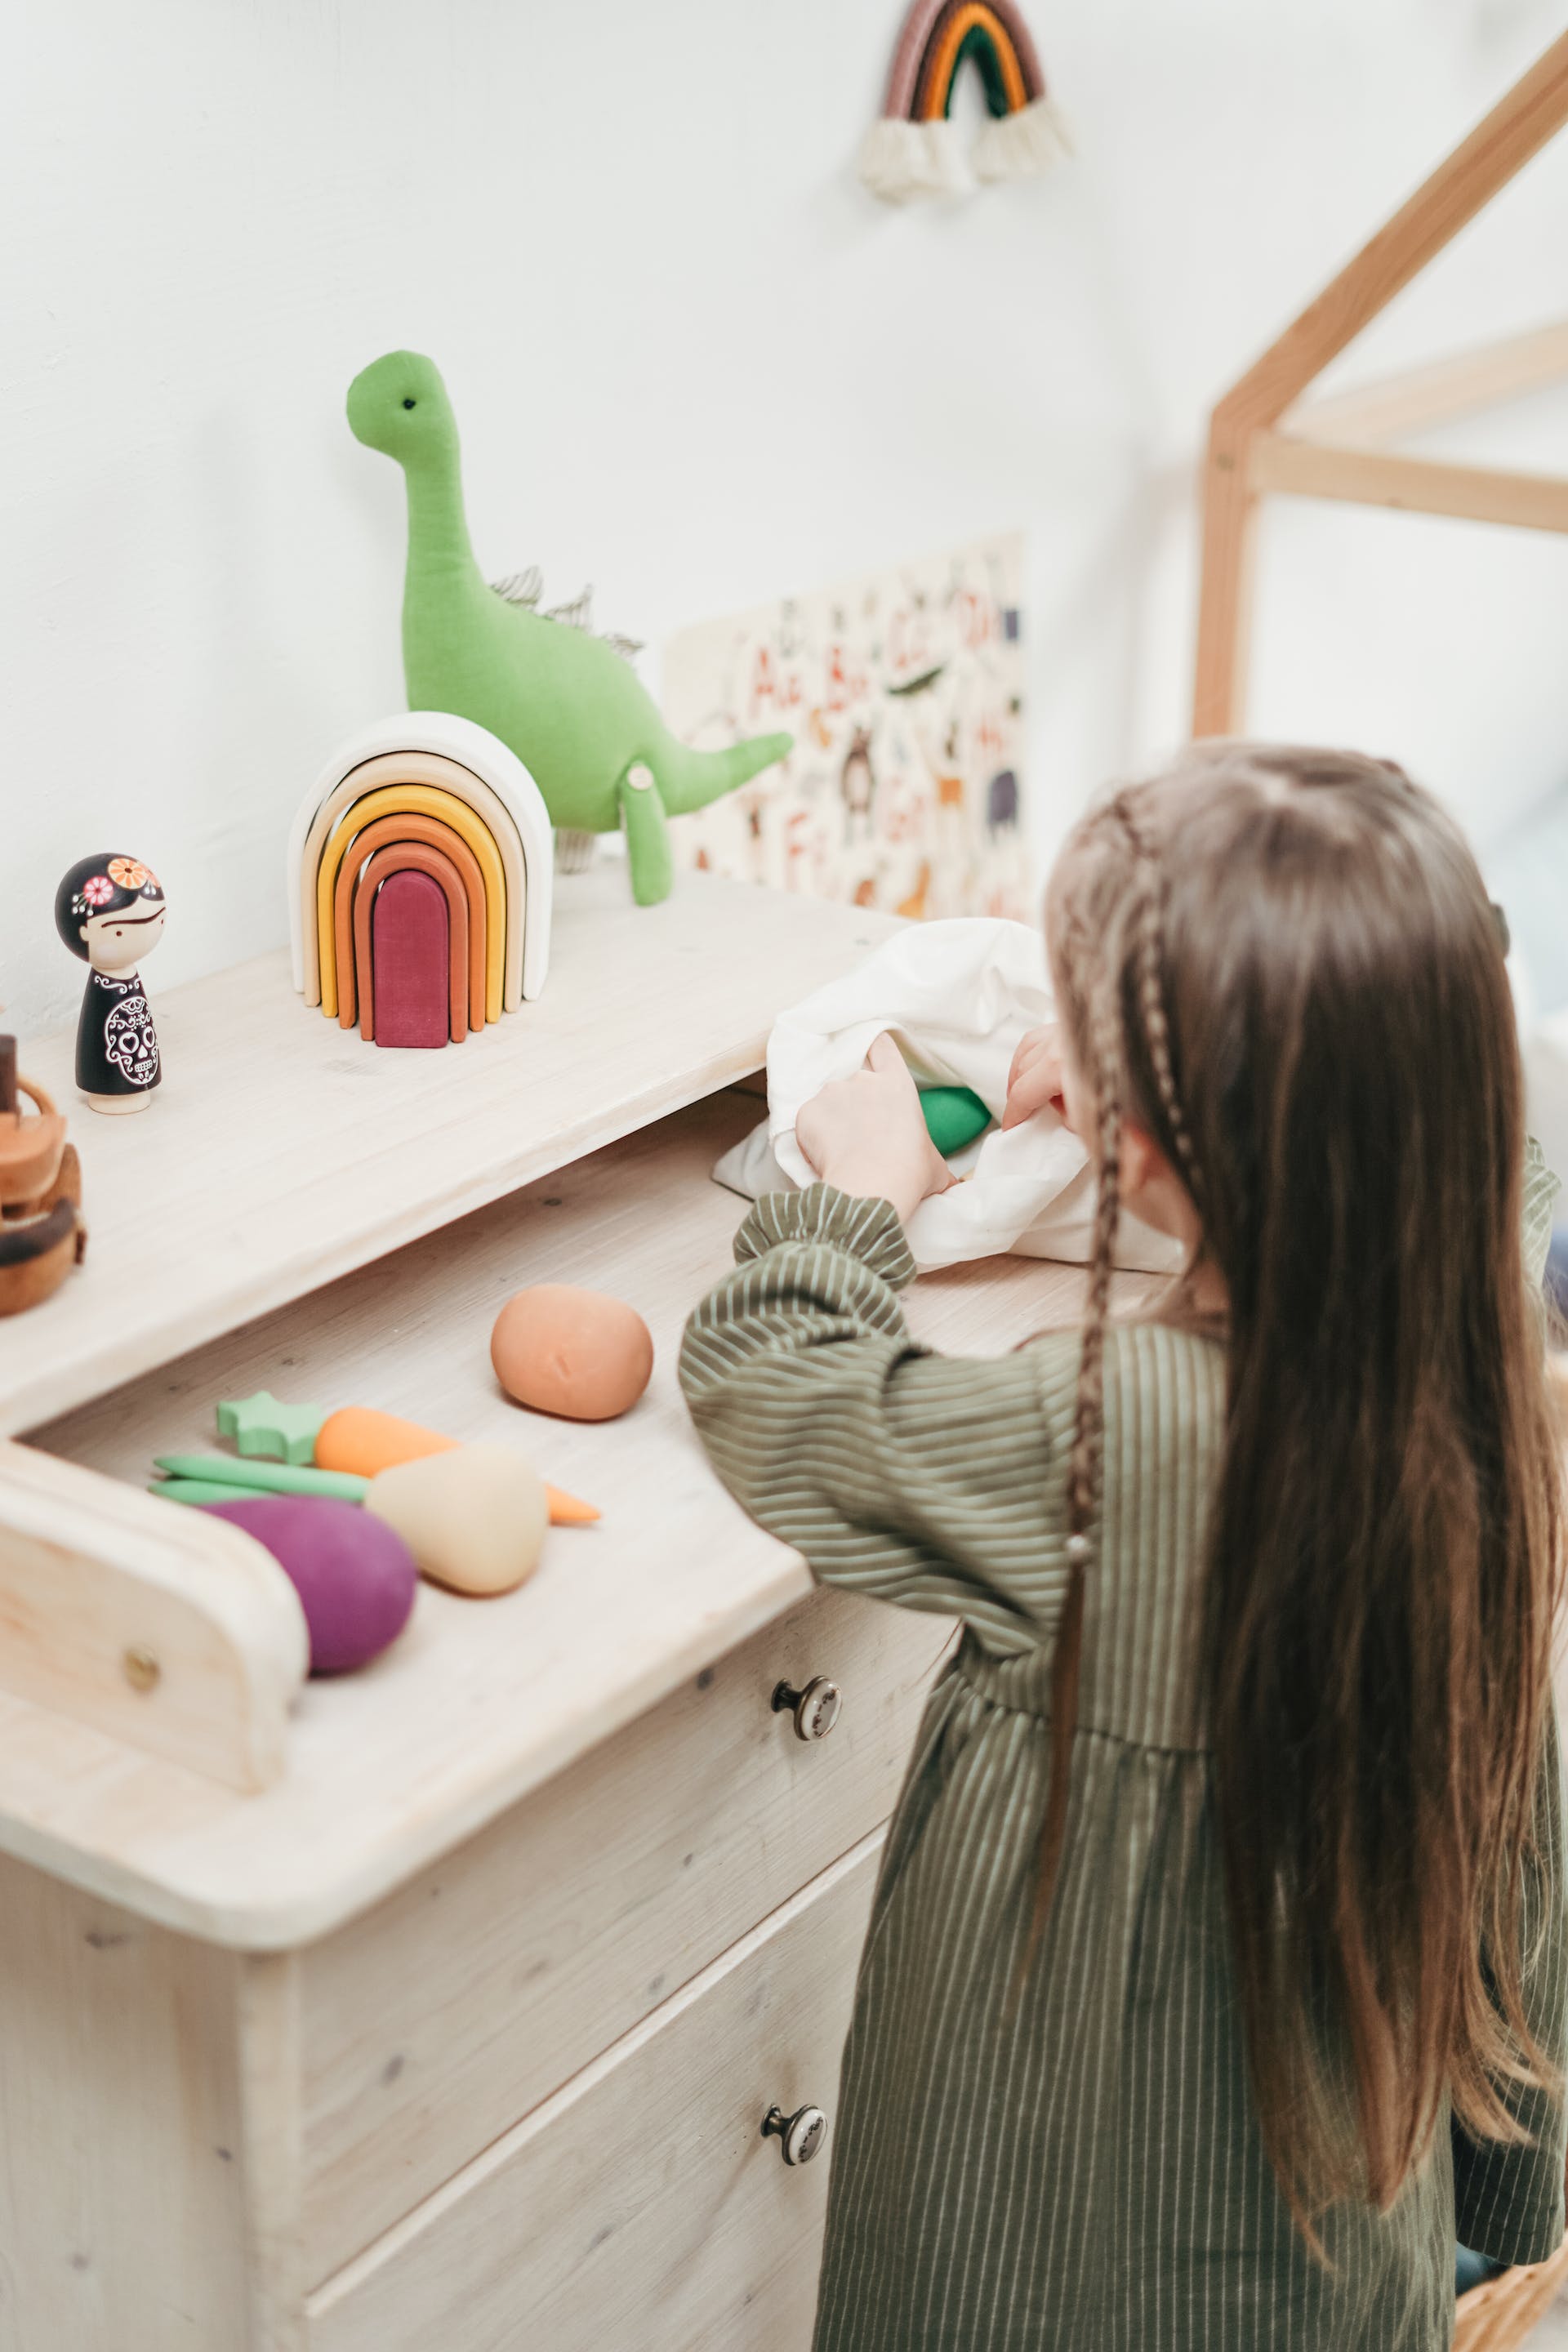 Little girl playing with her toys | Source: Pexels